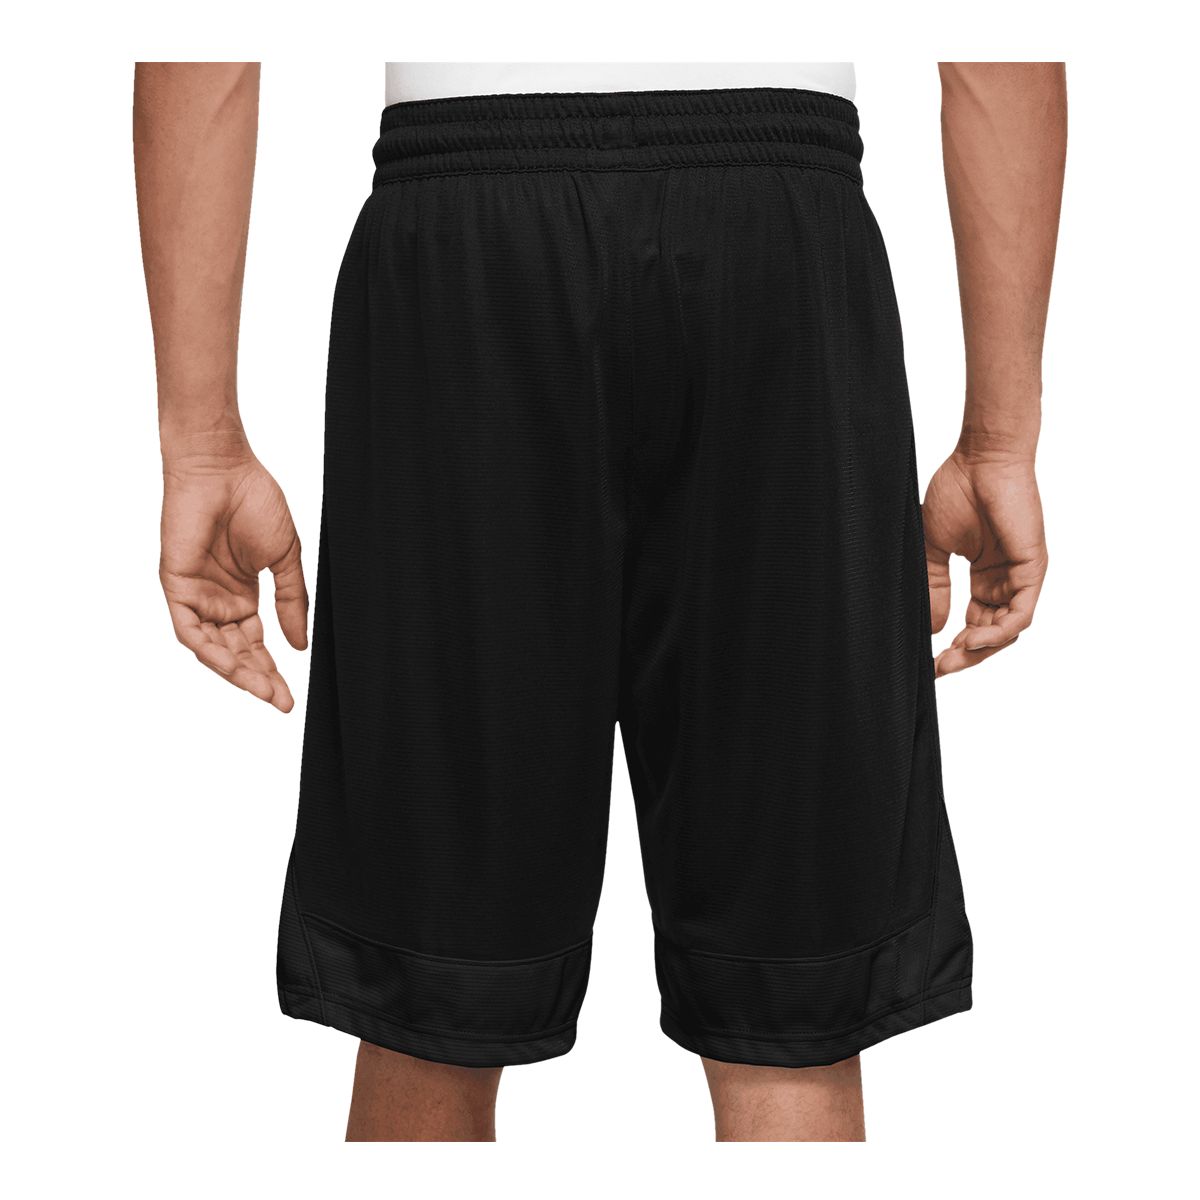 Under Armour Men's Baseline 10-in Basketball Shorts, Loose Fit Quick-Dry